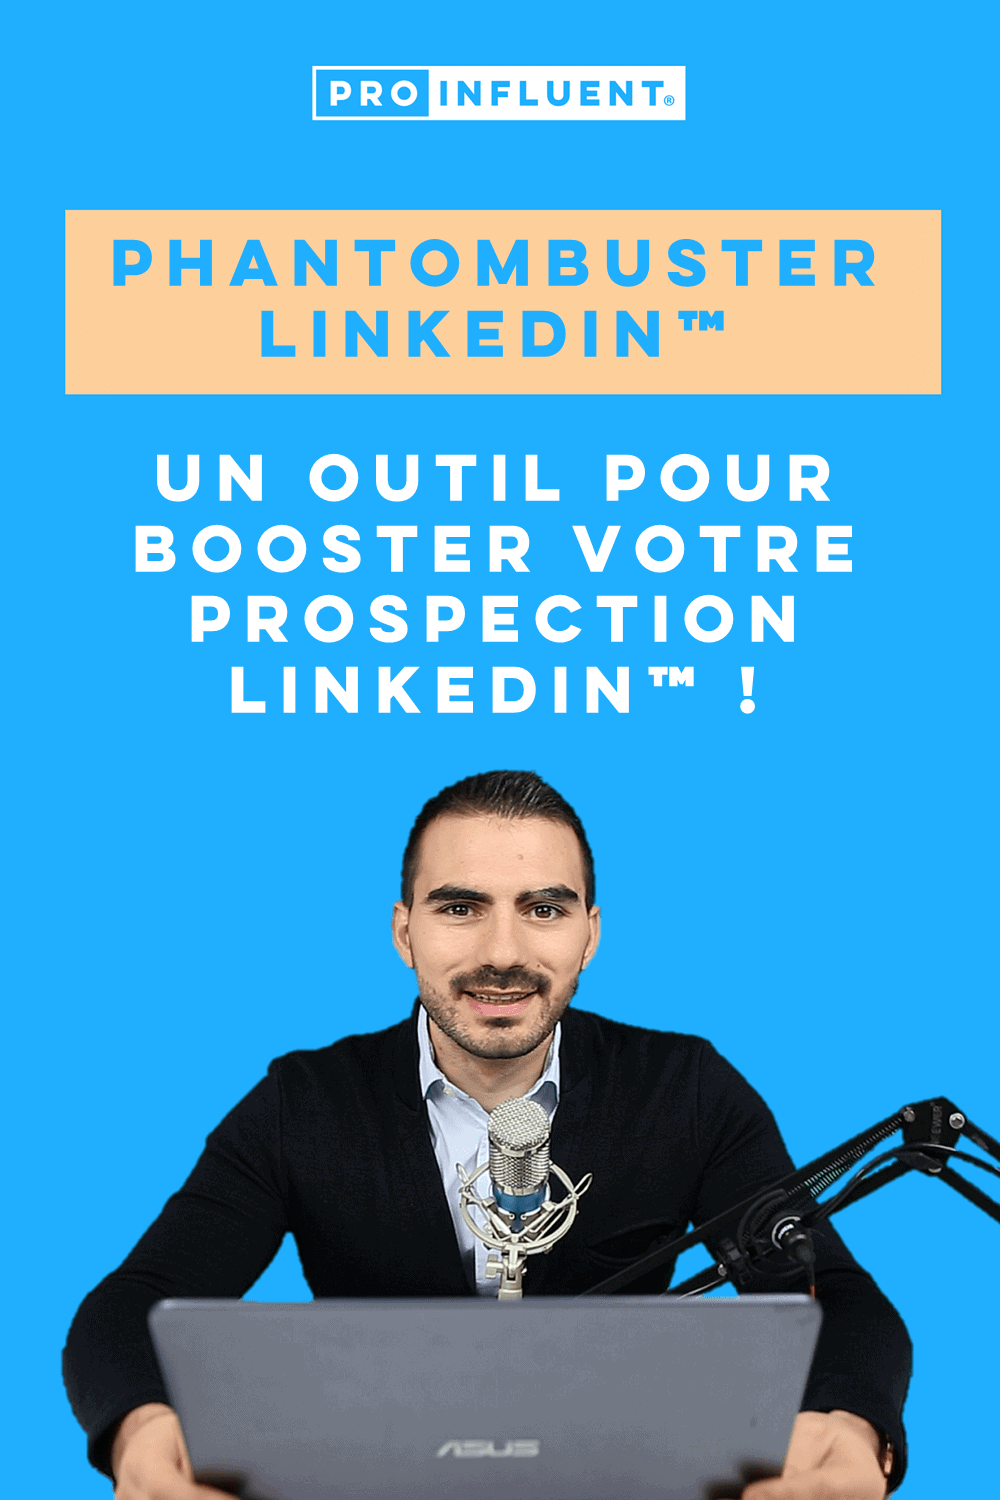 Phantombuster LinkedIn™: a tool to boost your LinkedIn™ prospecting!